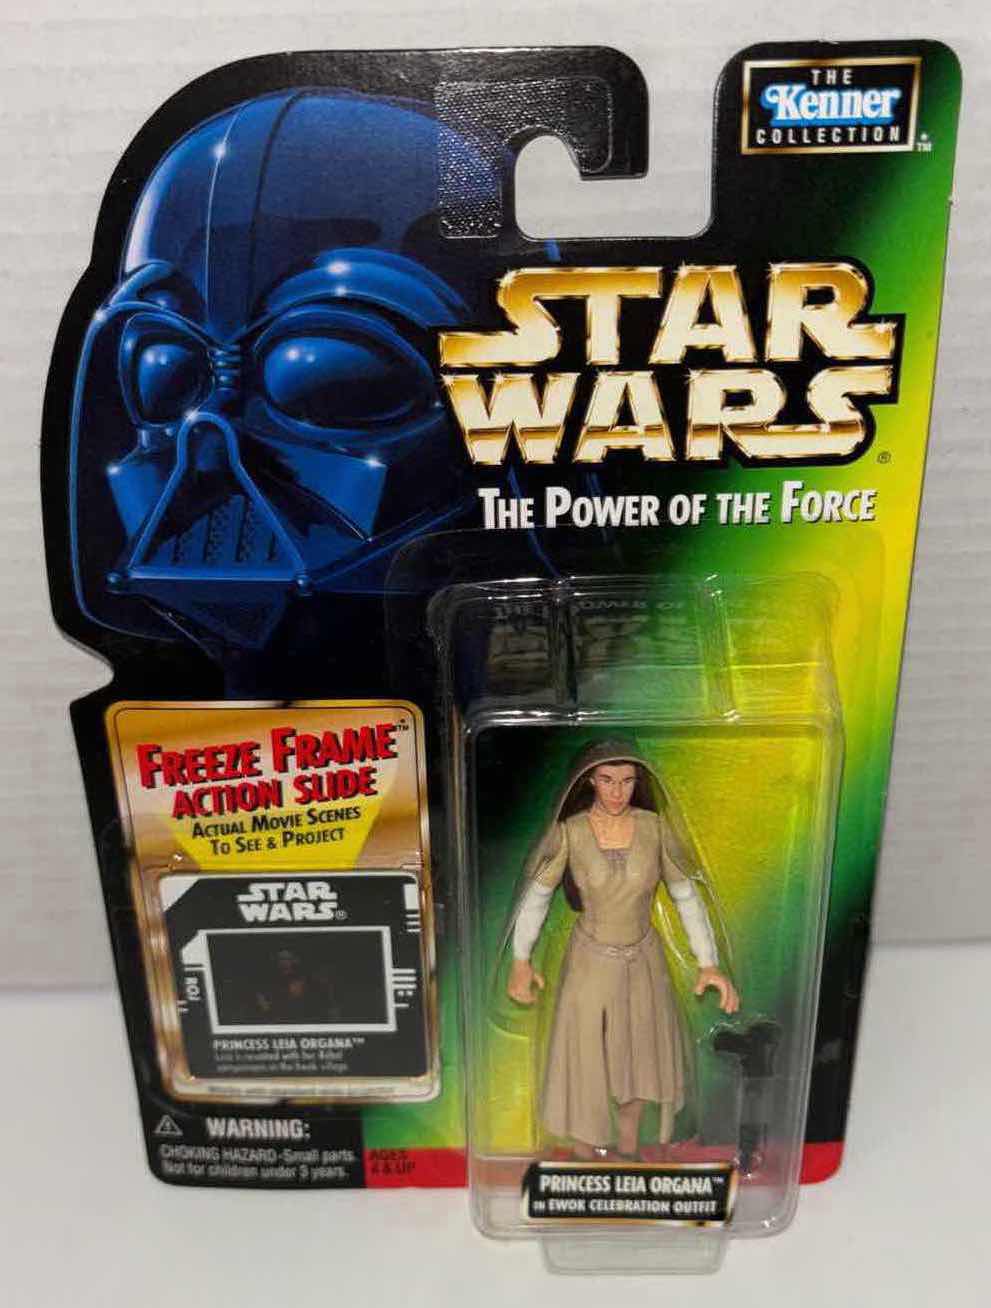 Photo 1 of NEW KENNER STAR WARS THE POWER OF THE FORCE ACTION FIGURE, PRINCESS LEIA ORGANA IN EWOK CELEBRATION OUTFIT & FREEZE FRAME ACTION SLIDE